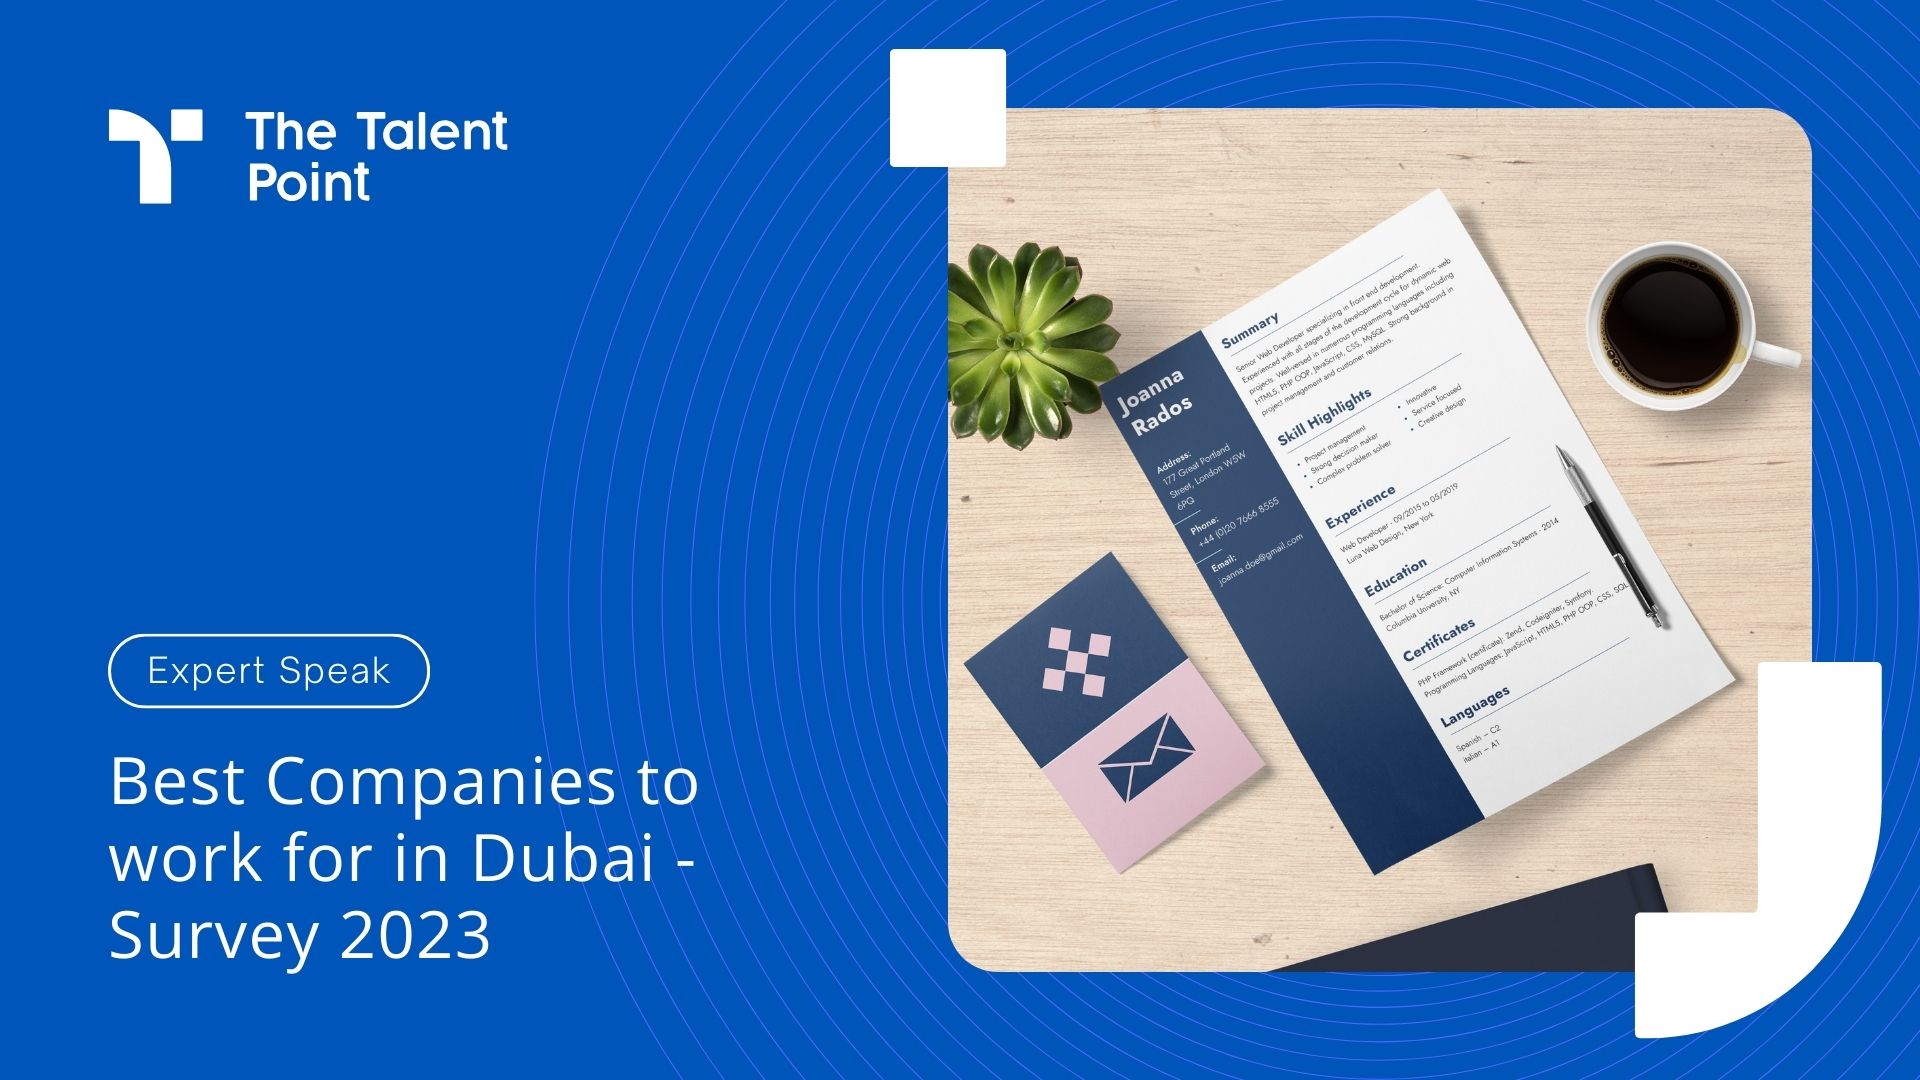 Best Companies to work for in Dubai - Survey 2023